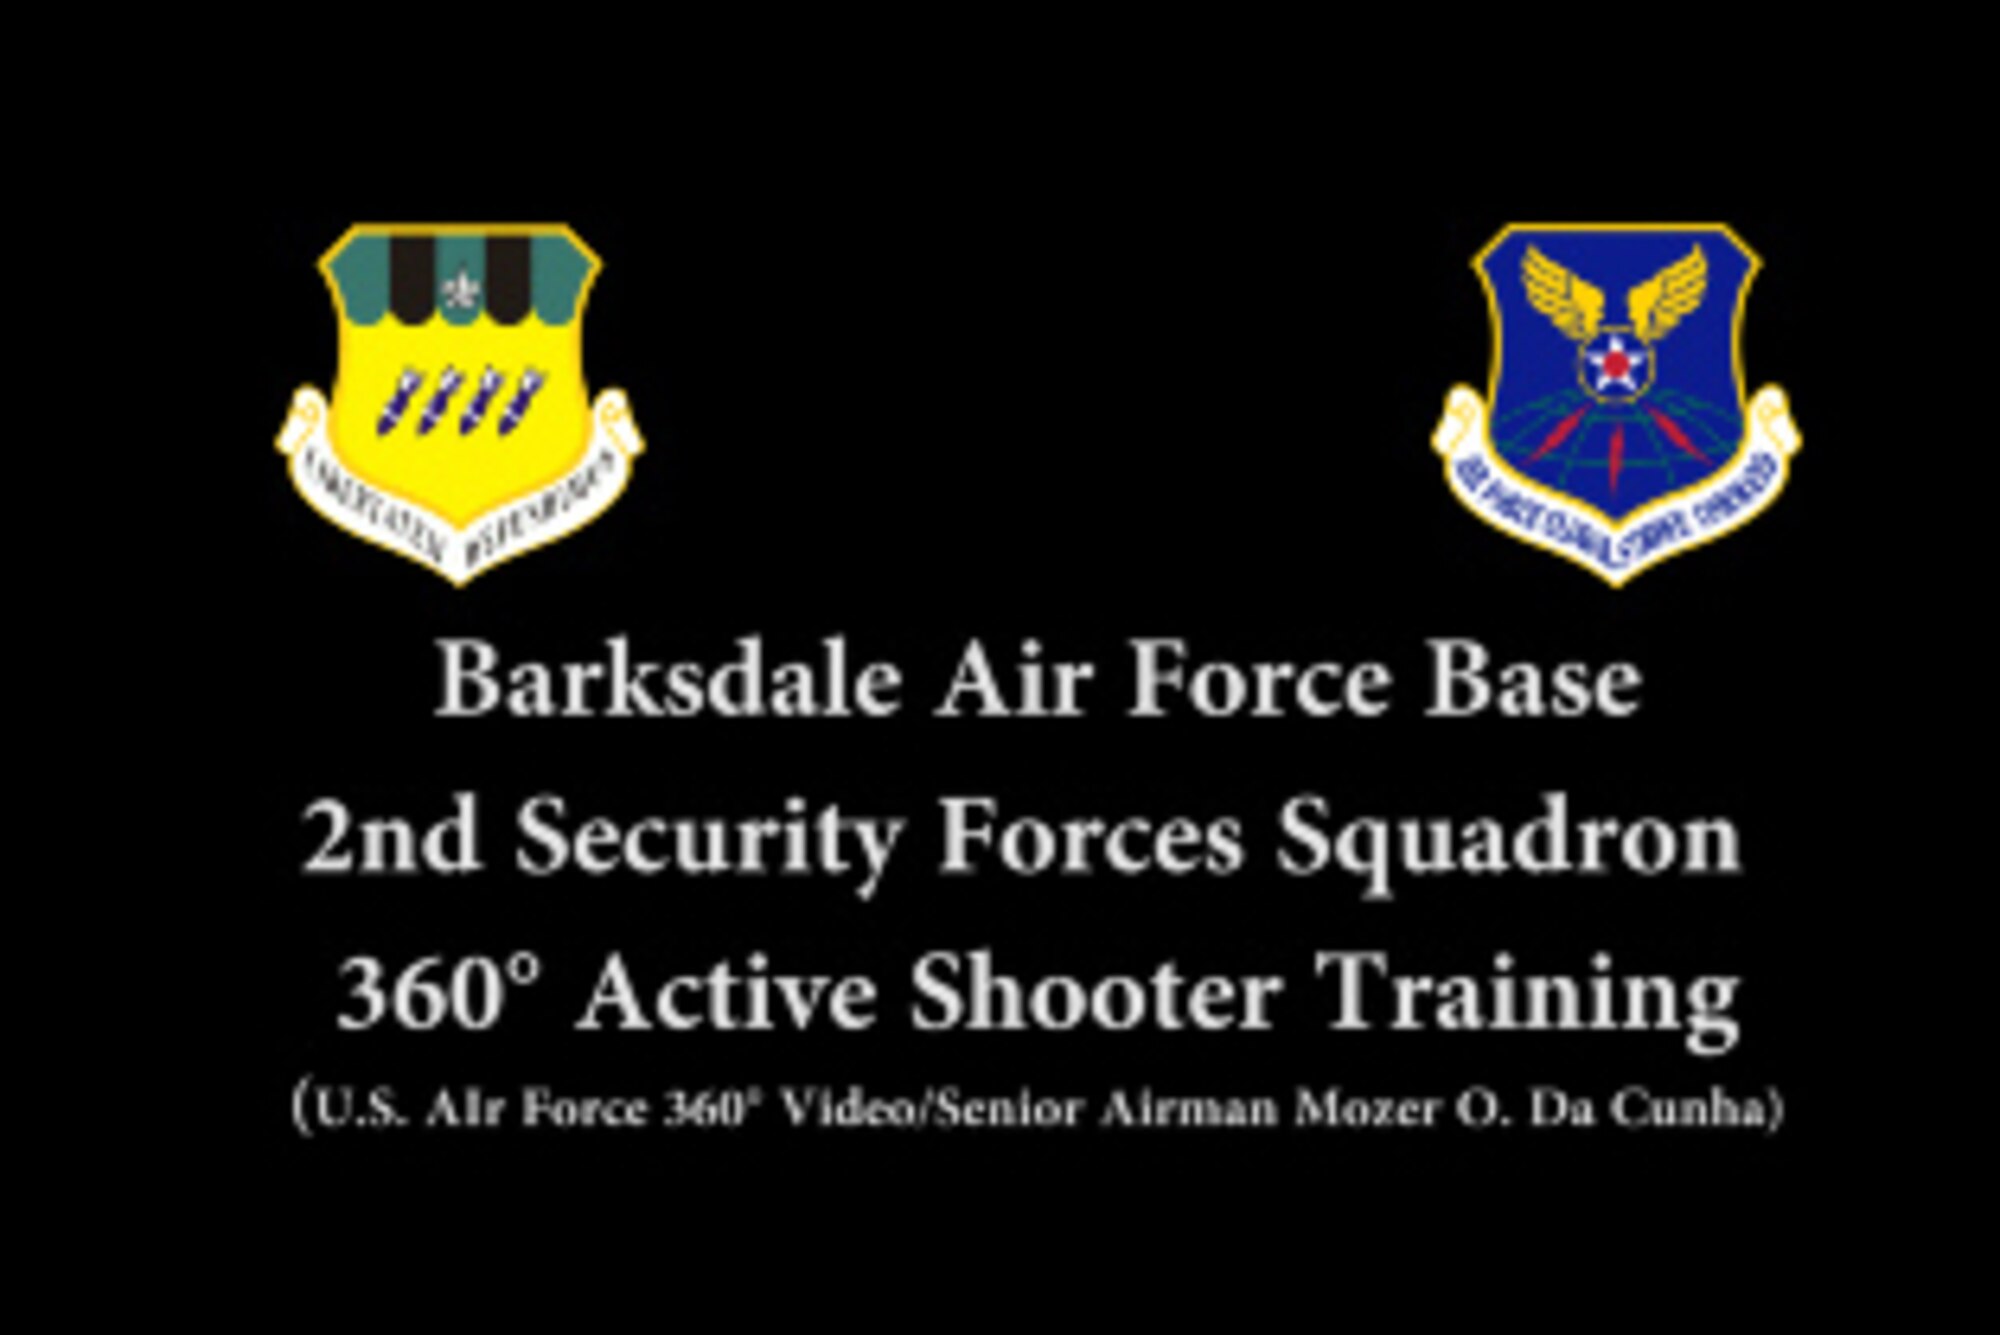 Join Barksdale's defenders for an immersive 360° training exercise. Active shooter simulations provide defenders with a safe environment to develop and hone vital skills necessary to eliminate real world threats.
